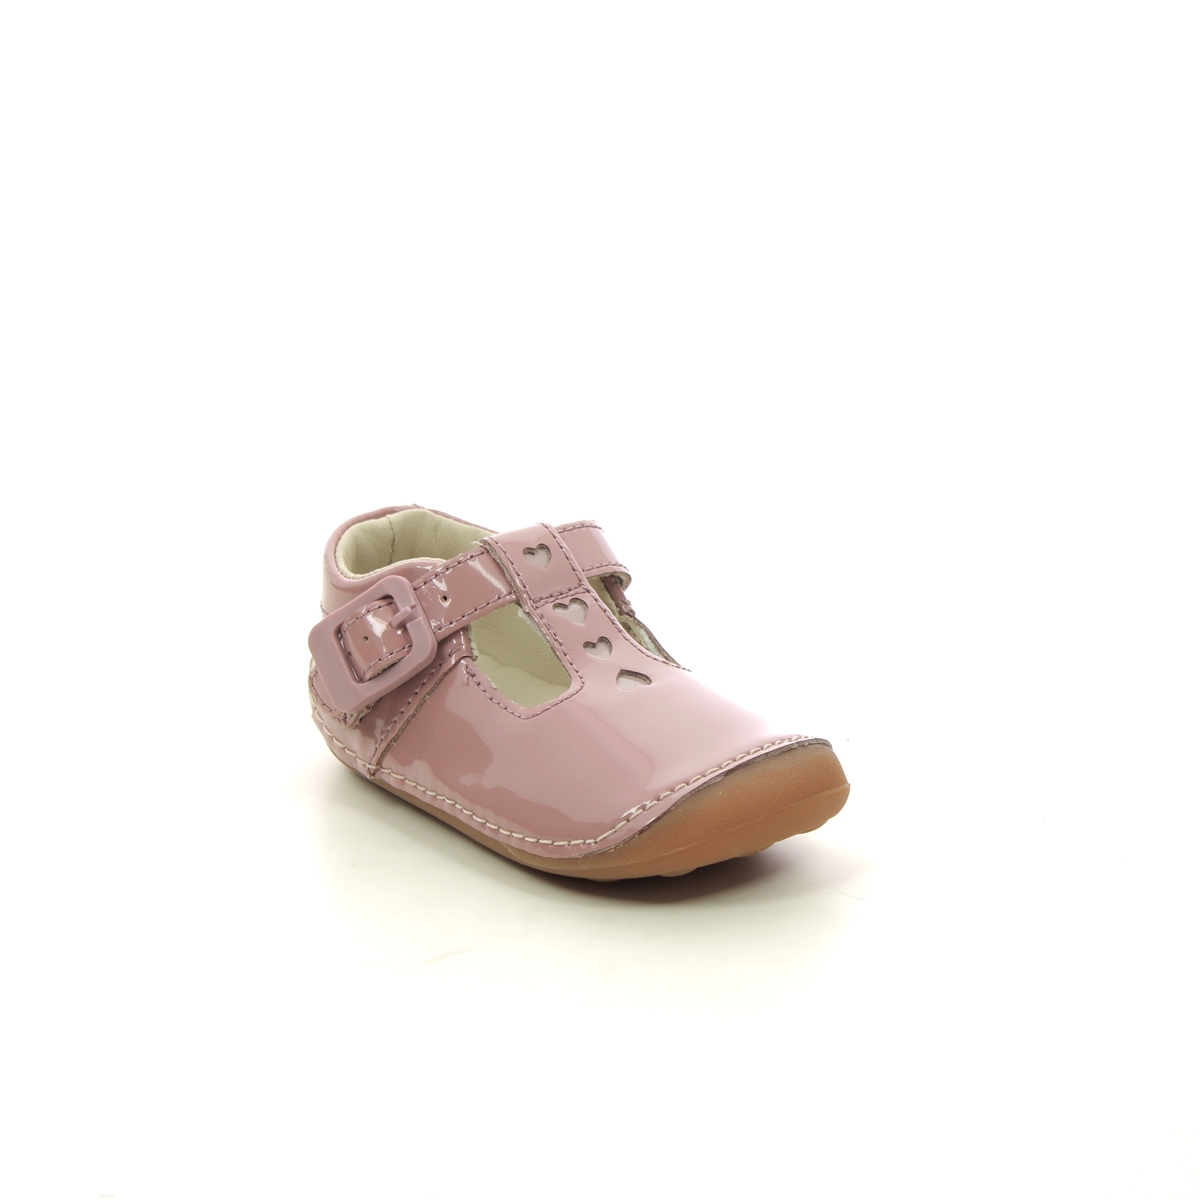 Clarks Tiny Beat T Pink Kids Girls First And Baby Shoes 694086F In Size 3 In Plain Pink F Width Fitting Regular Fit For kids